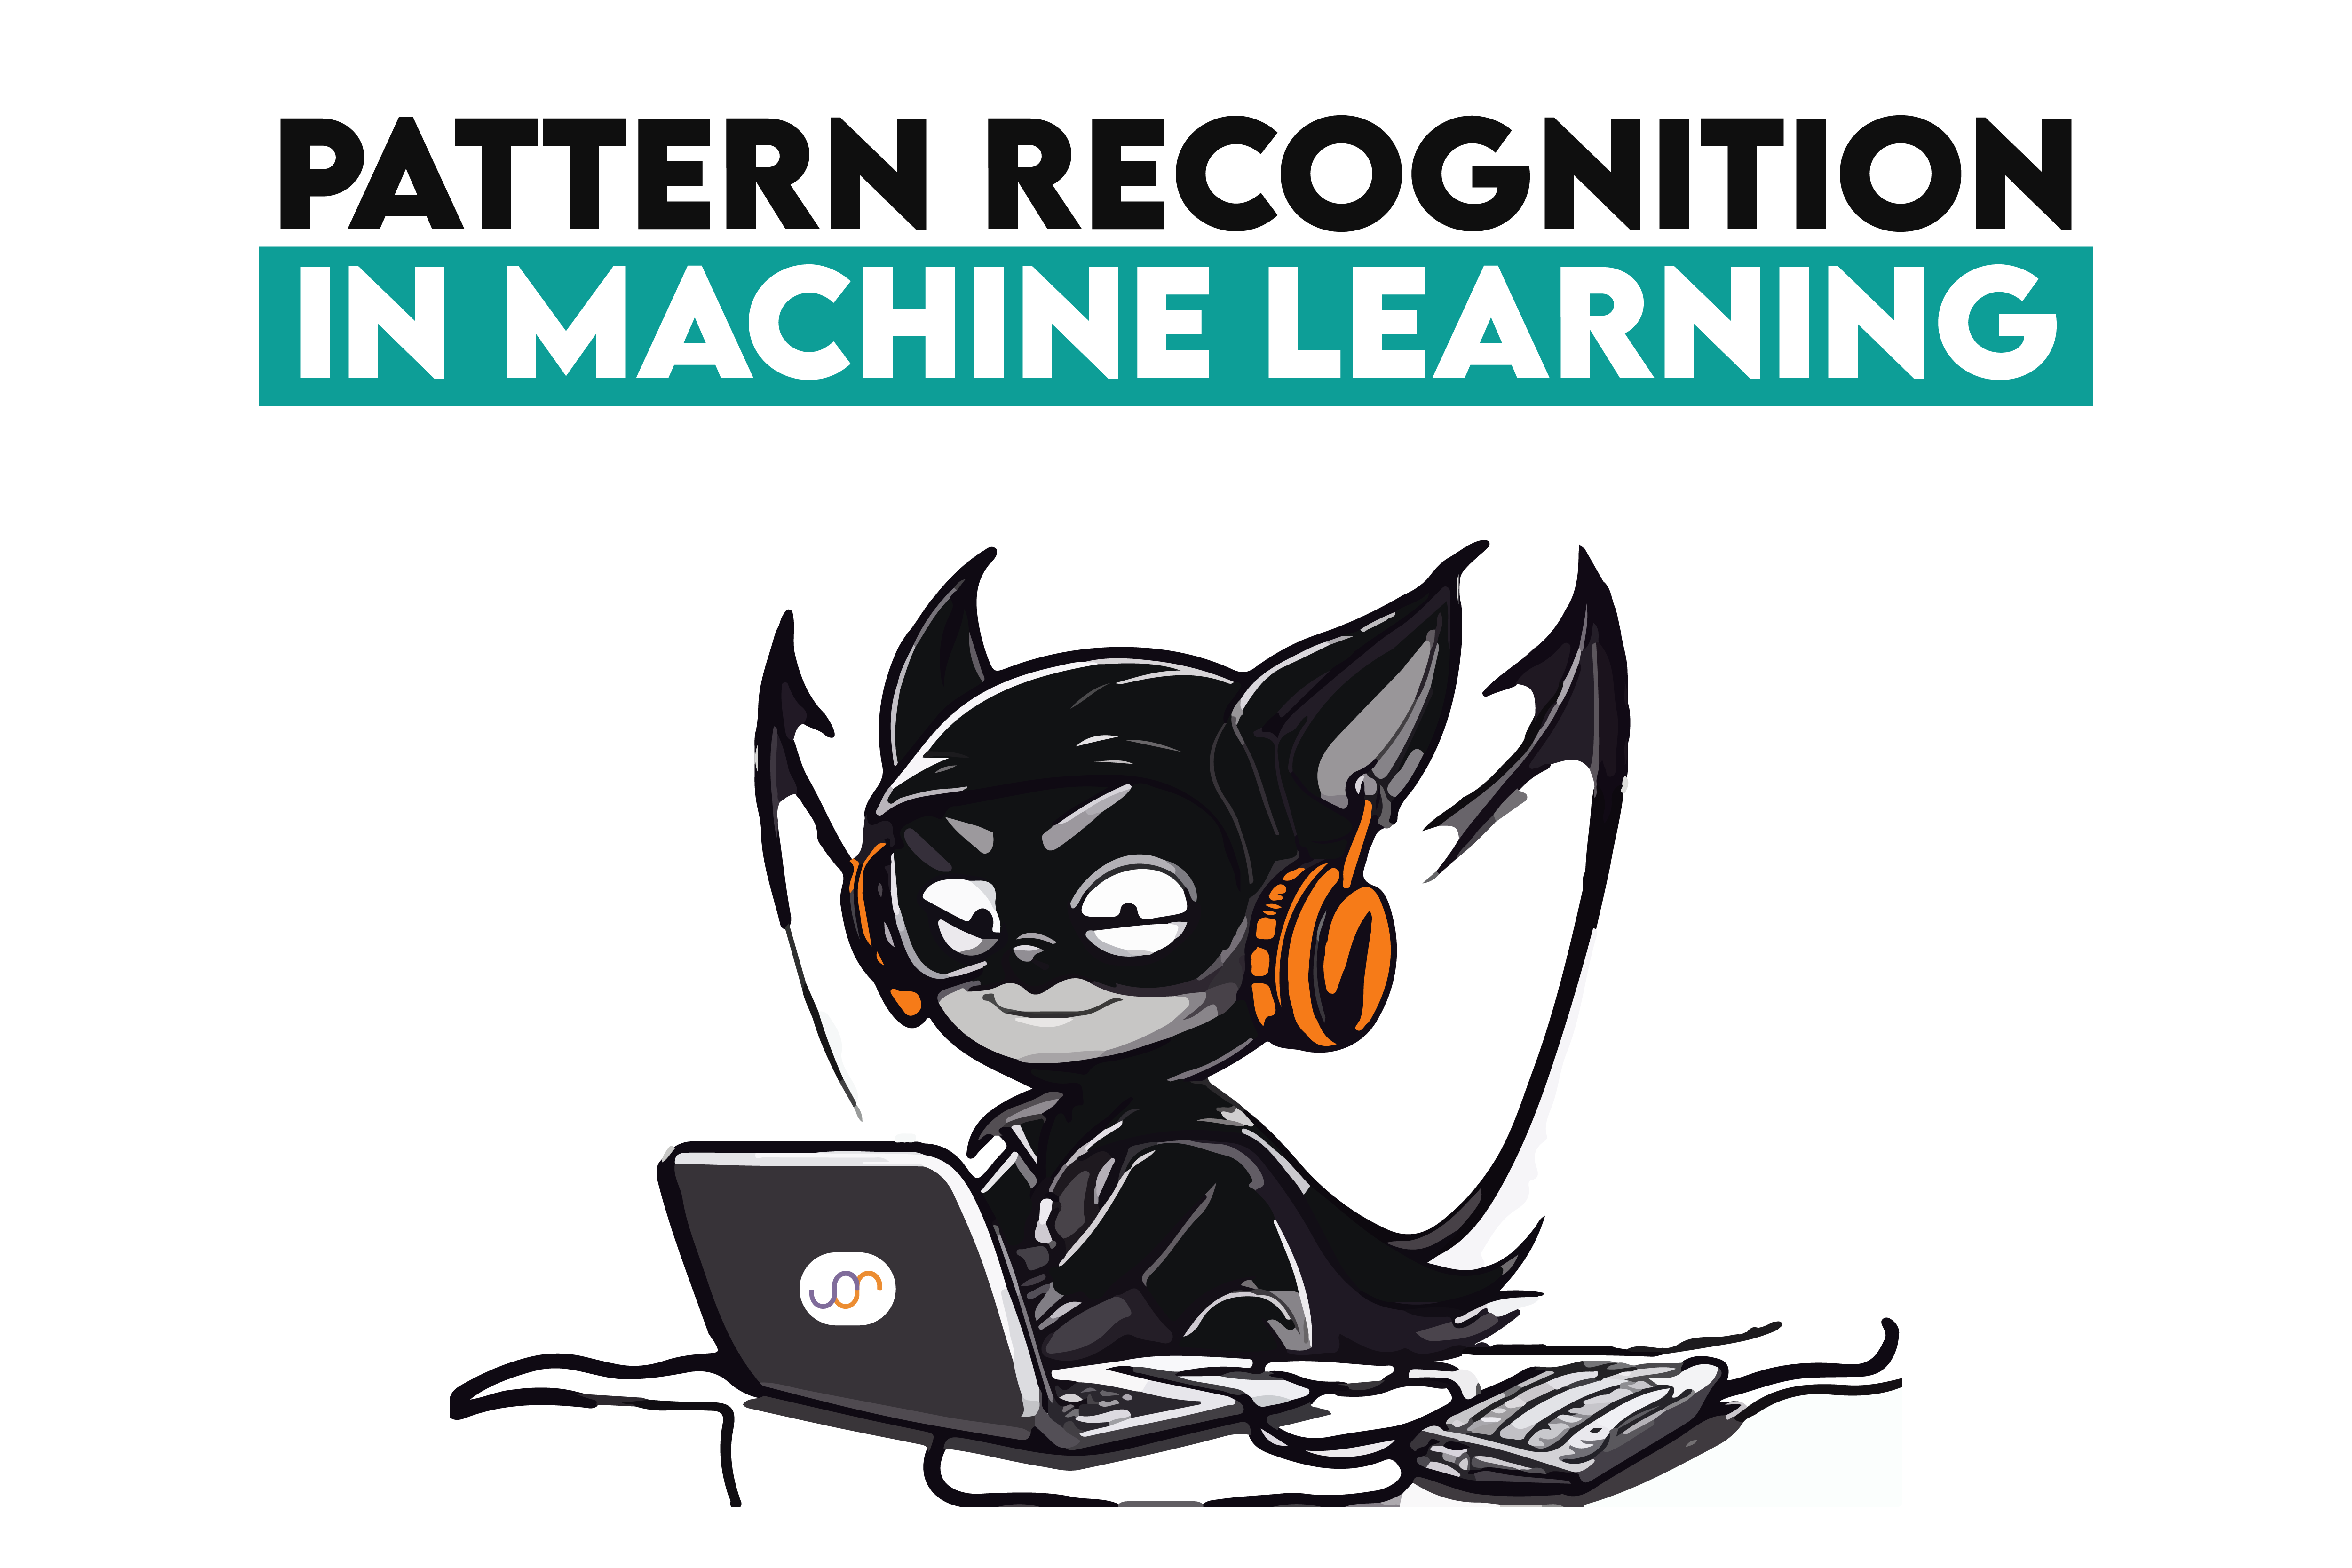 Pattern Recognition in Machine Learning